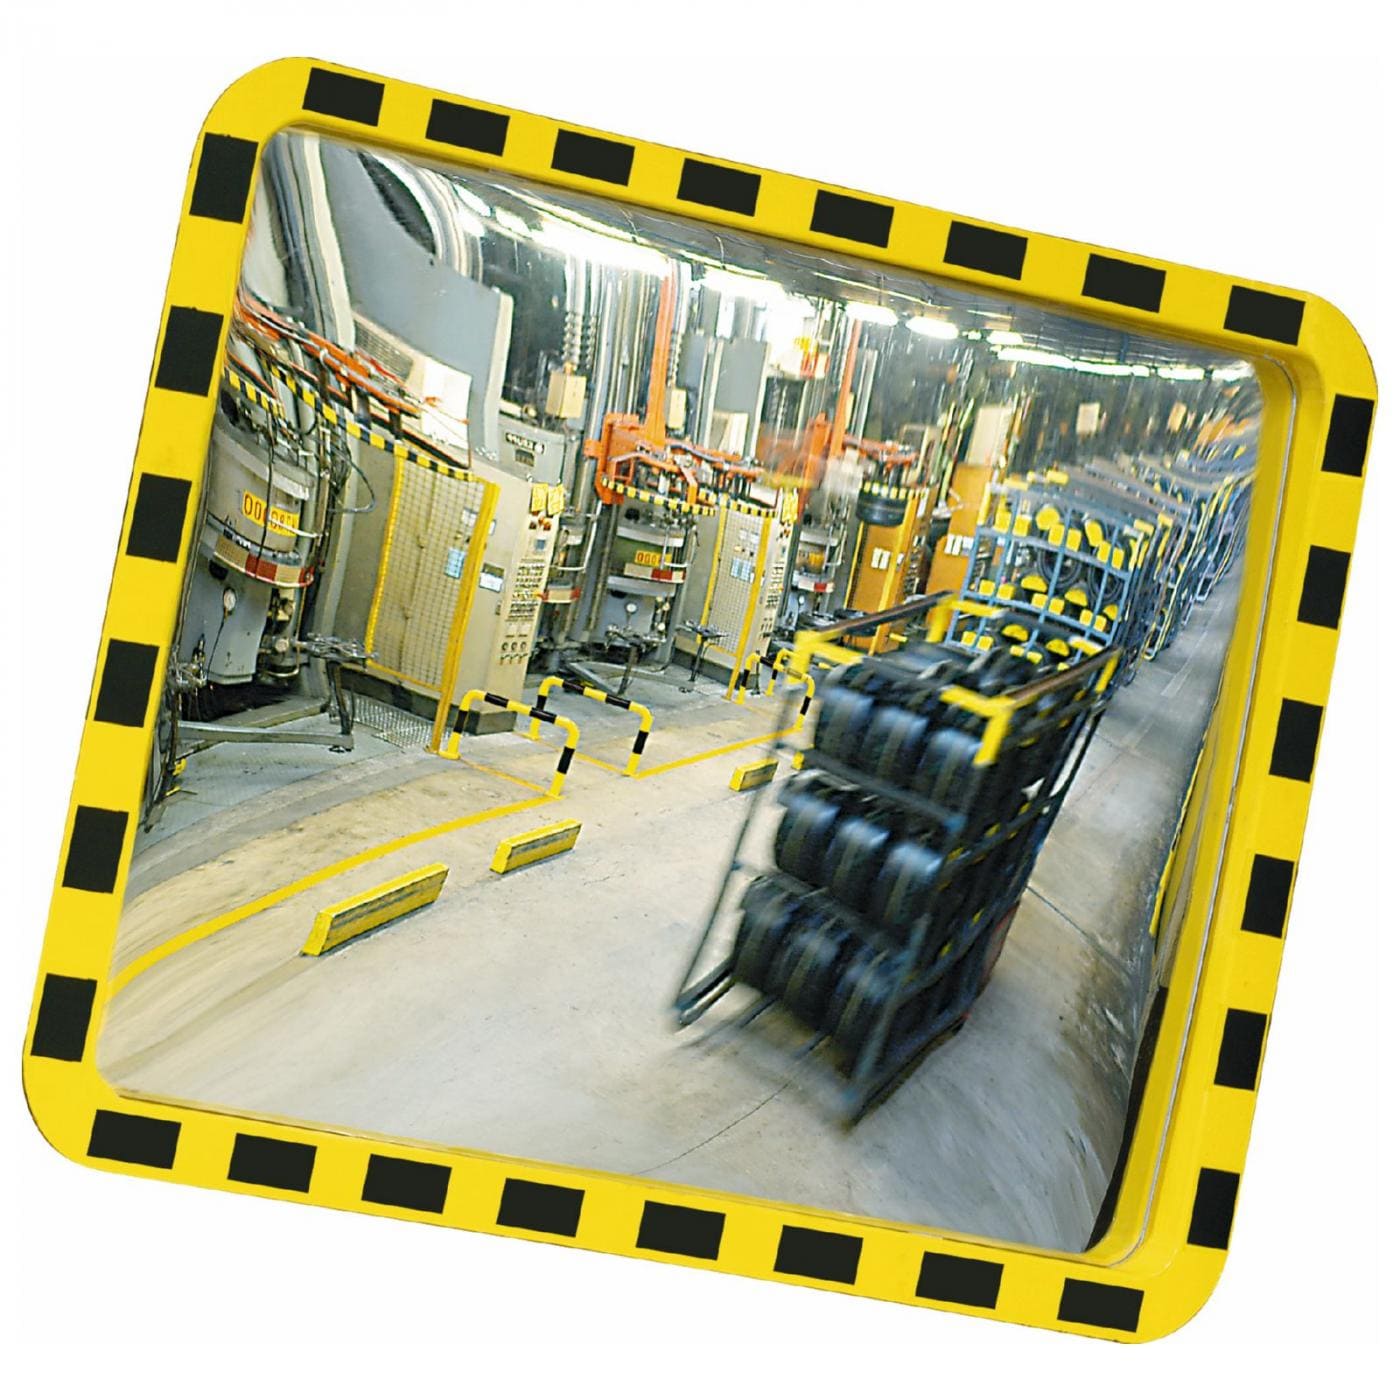 3 Locations to Place an Industrial Safety Mirror